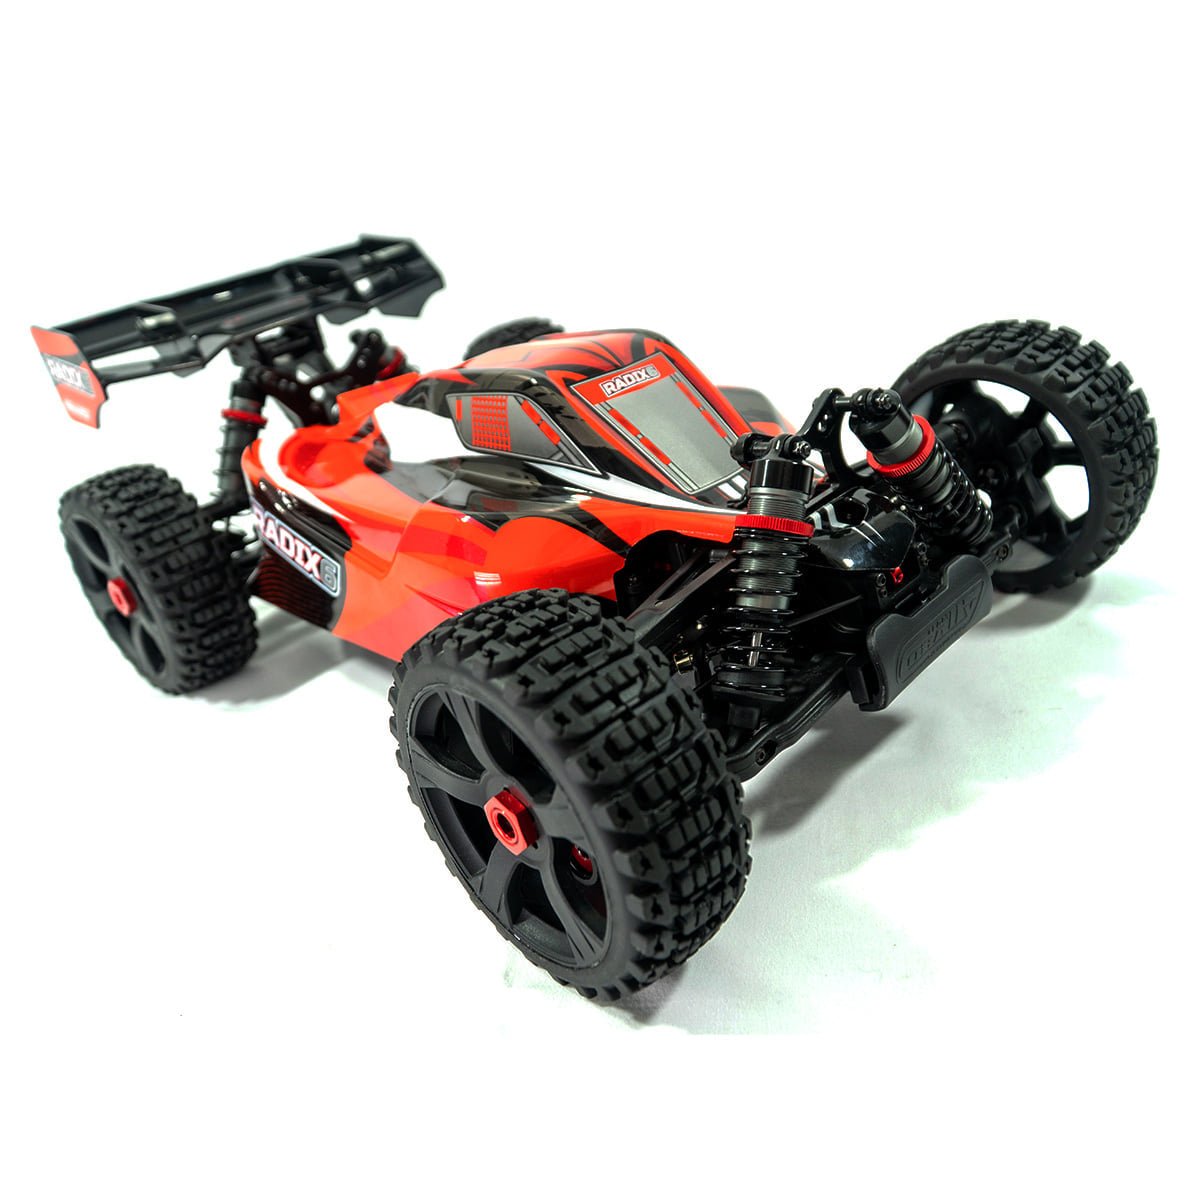 1/8 Radix XP 4WD 6S Brushless RTR (No Battery or Charger) - H y p e z RC